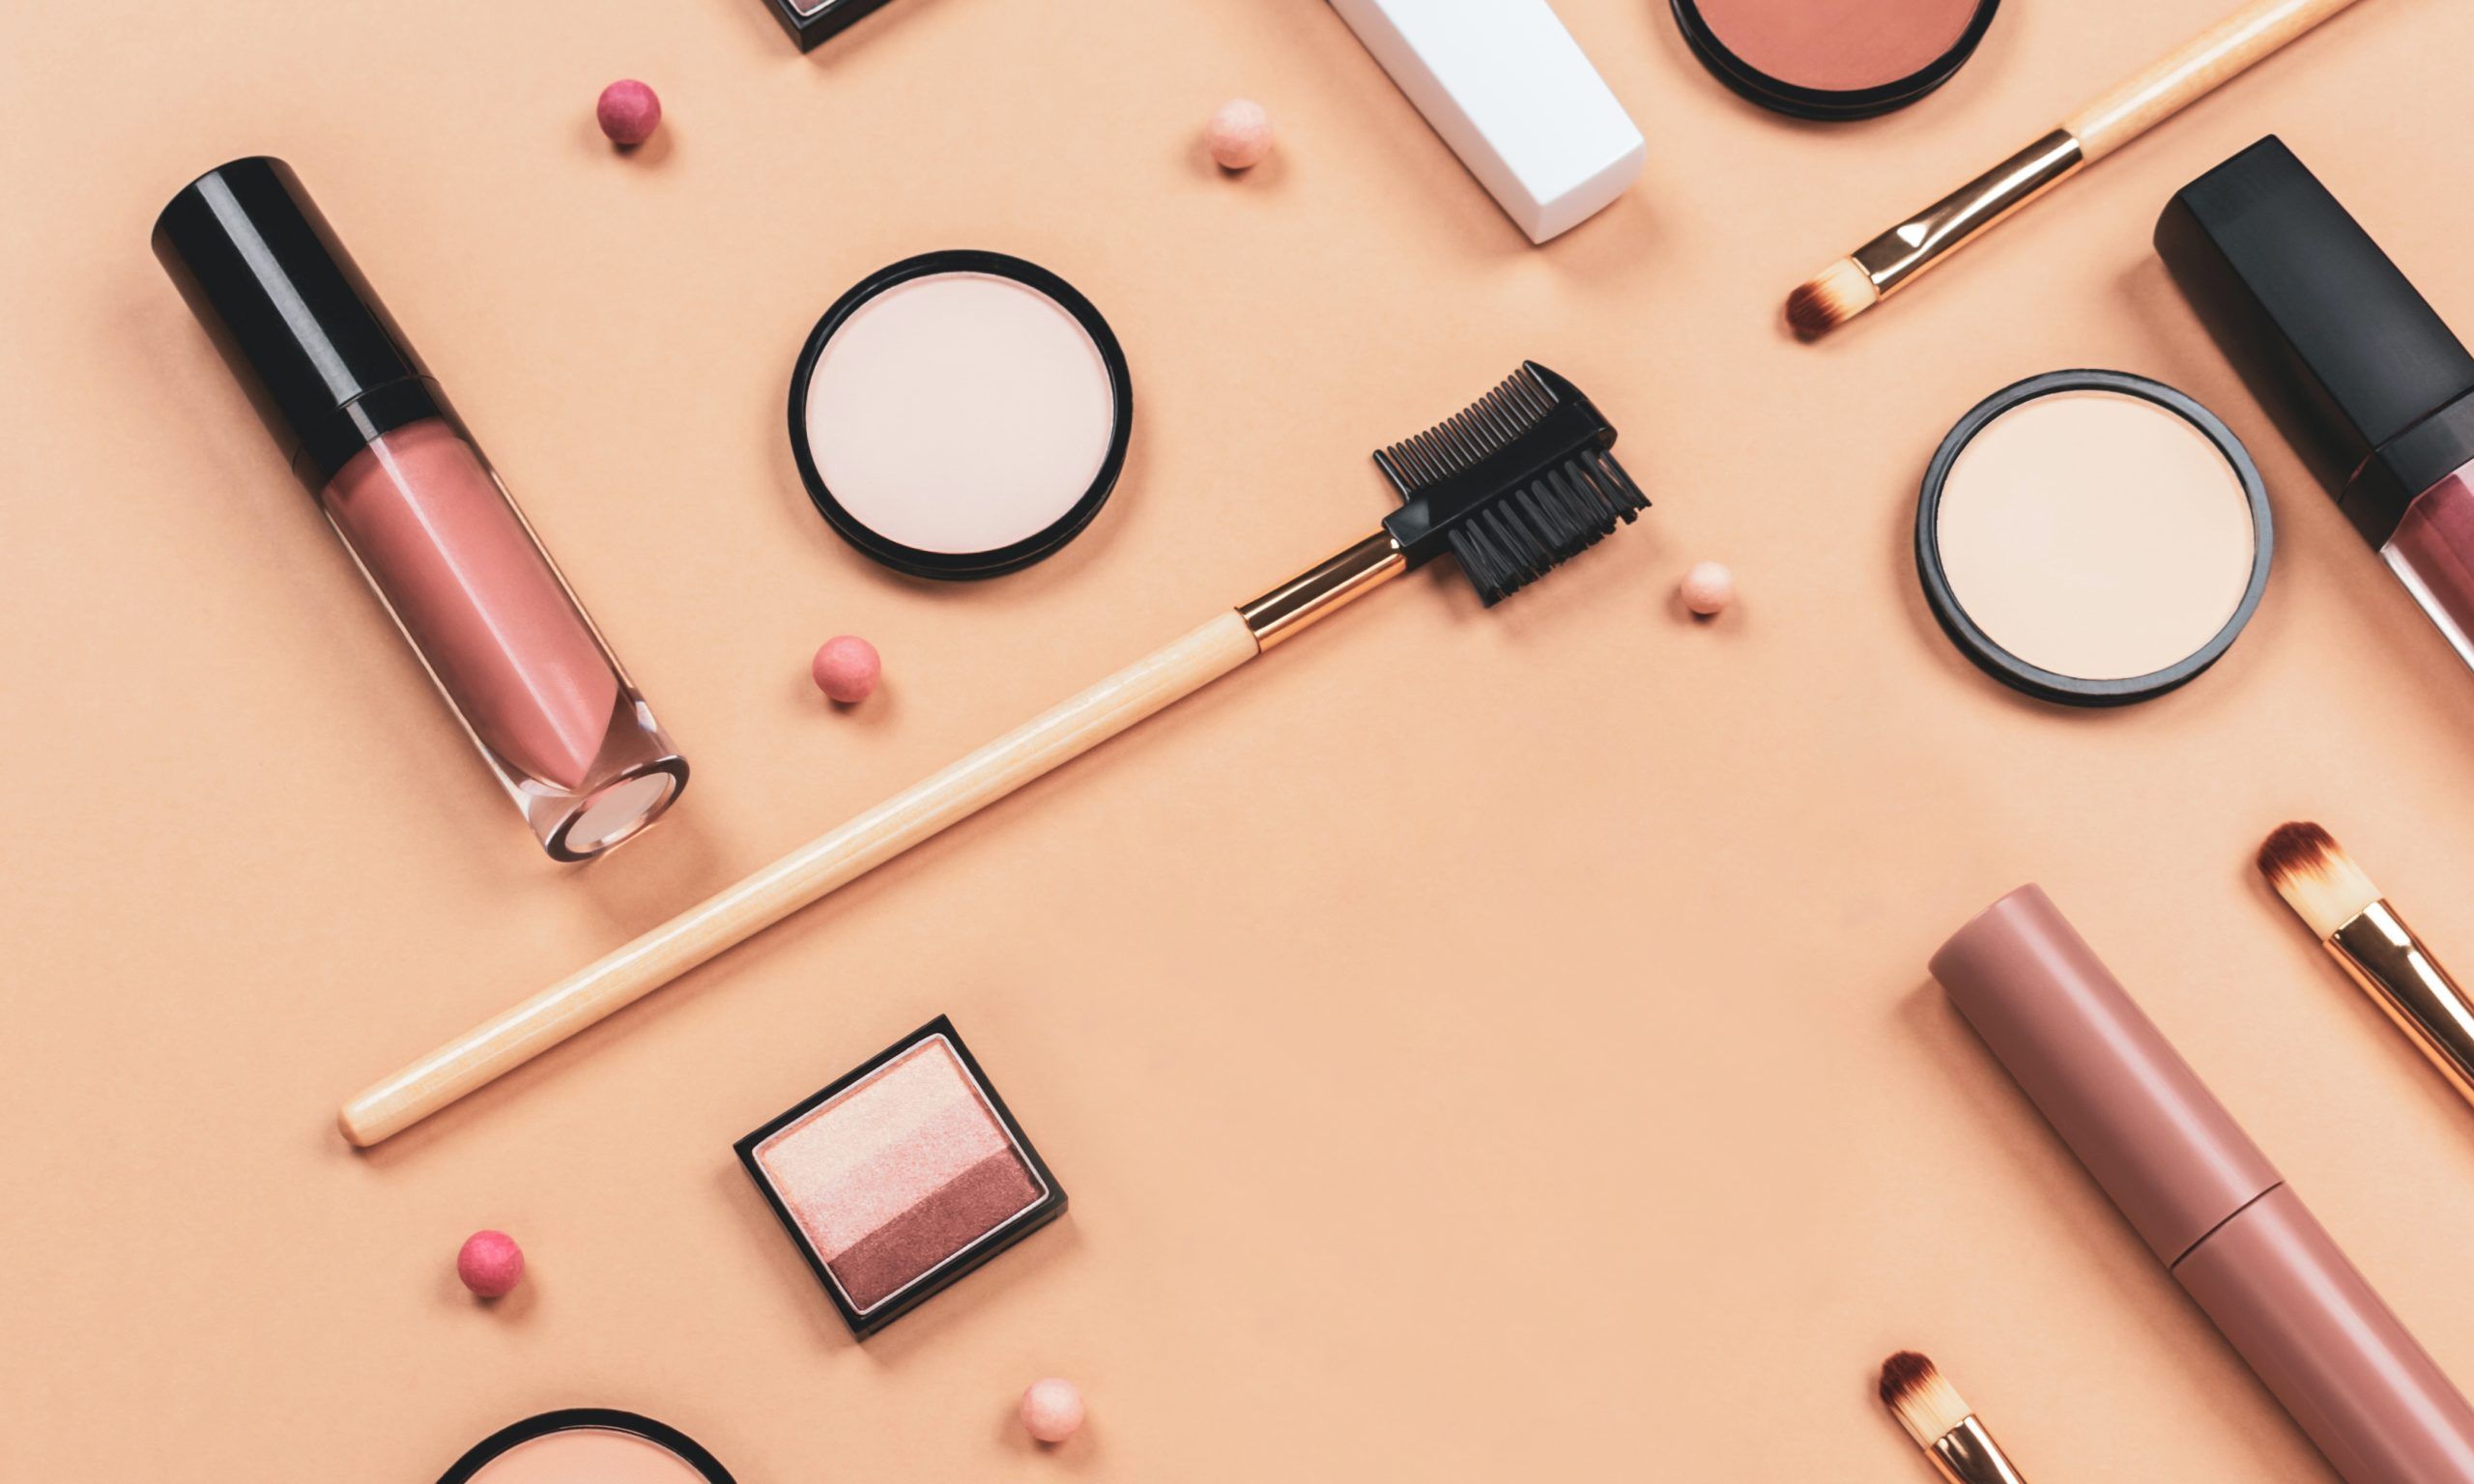 5 Chanel Beauty Products Worth the Splurge and 2 That Totally Aren